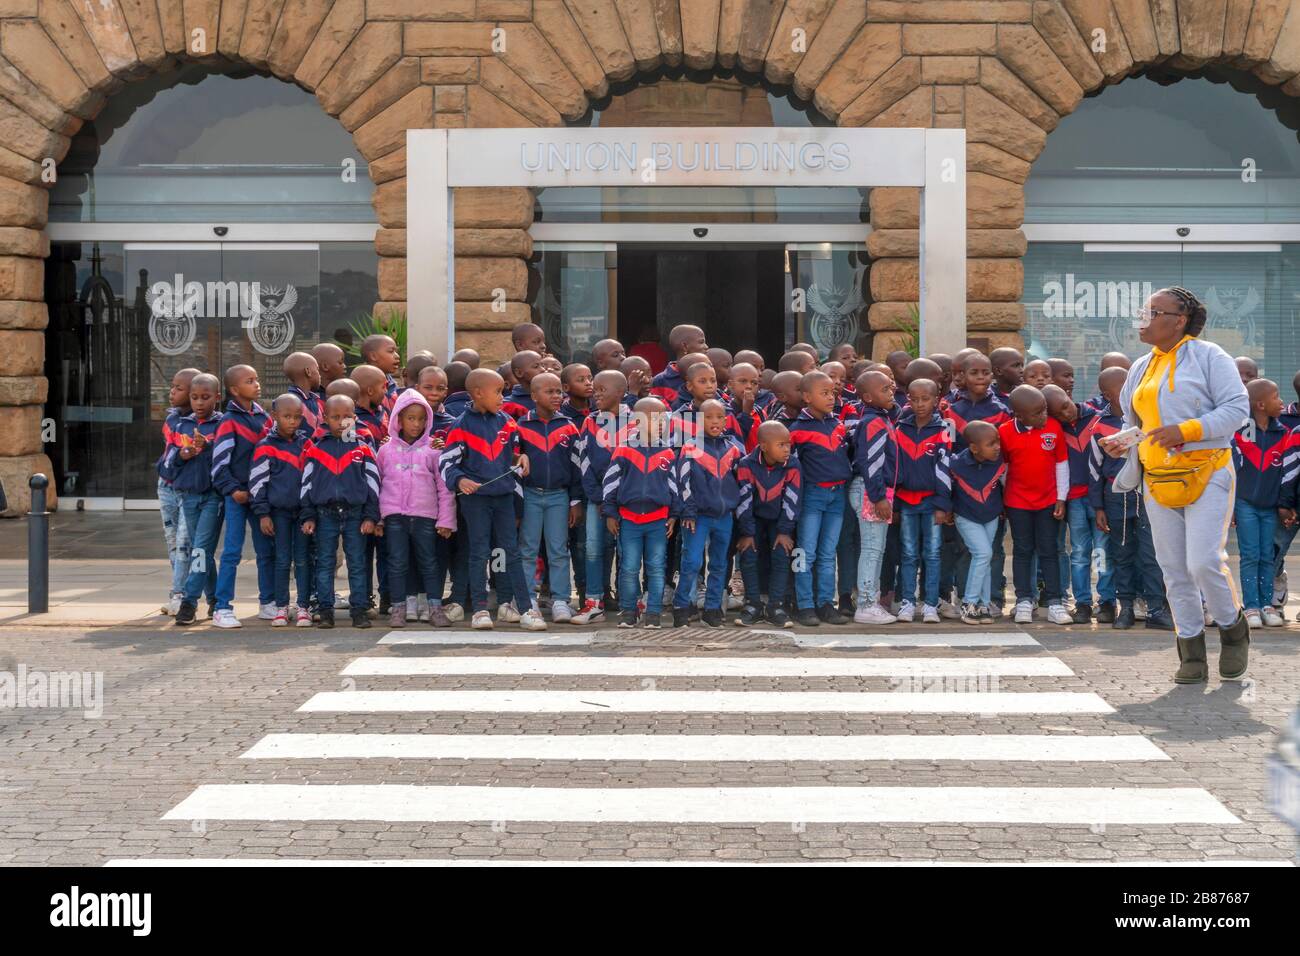 Pretoria, South Africa - May 24, 2019: Group of children taking photo on their excursion to Union Buildings Stock Photo